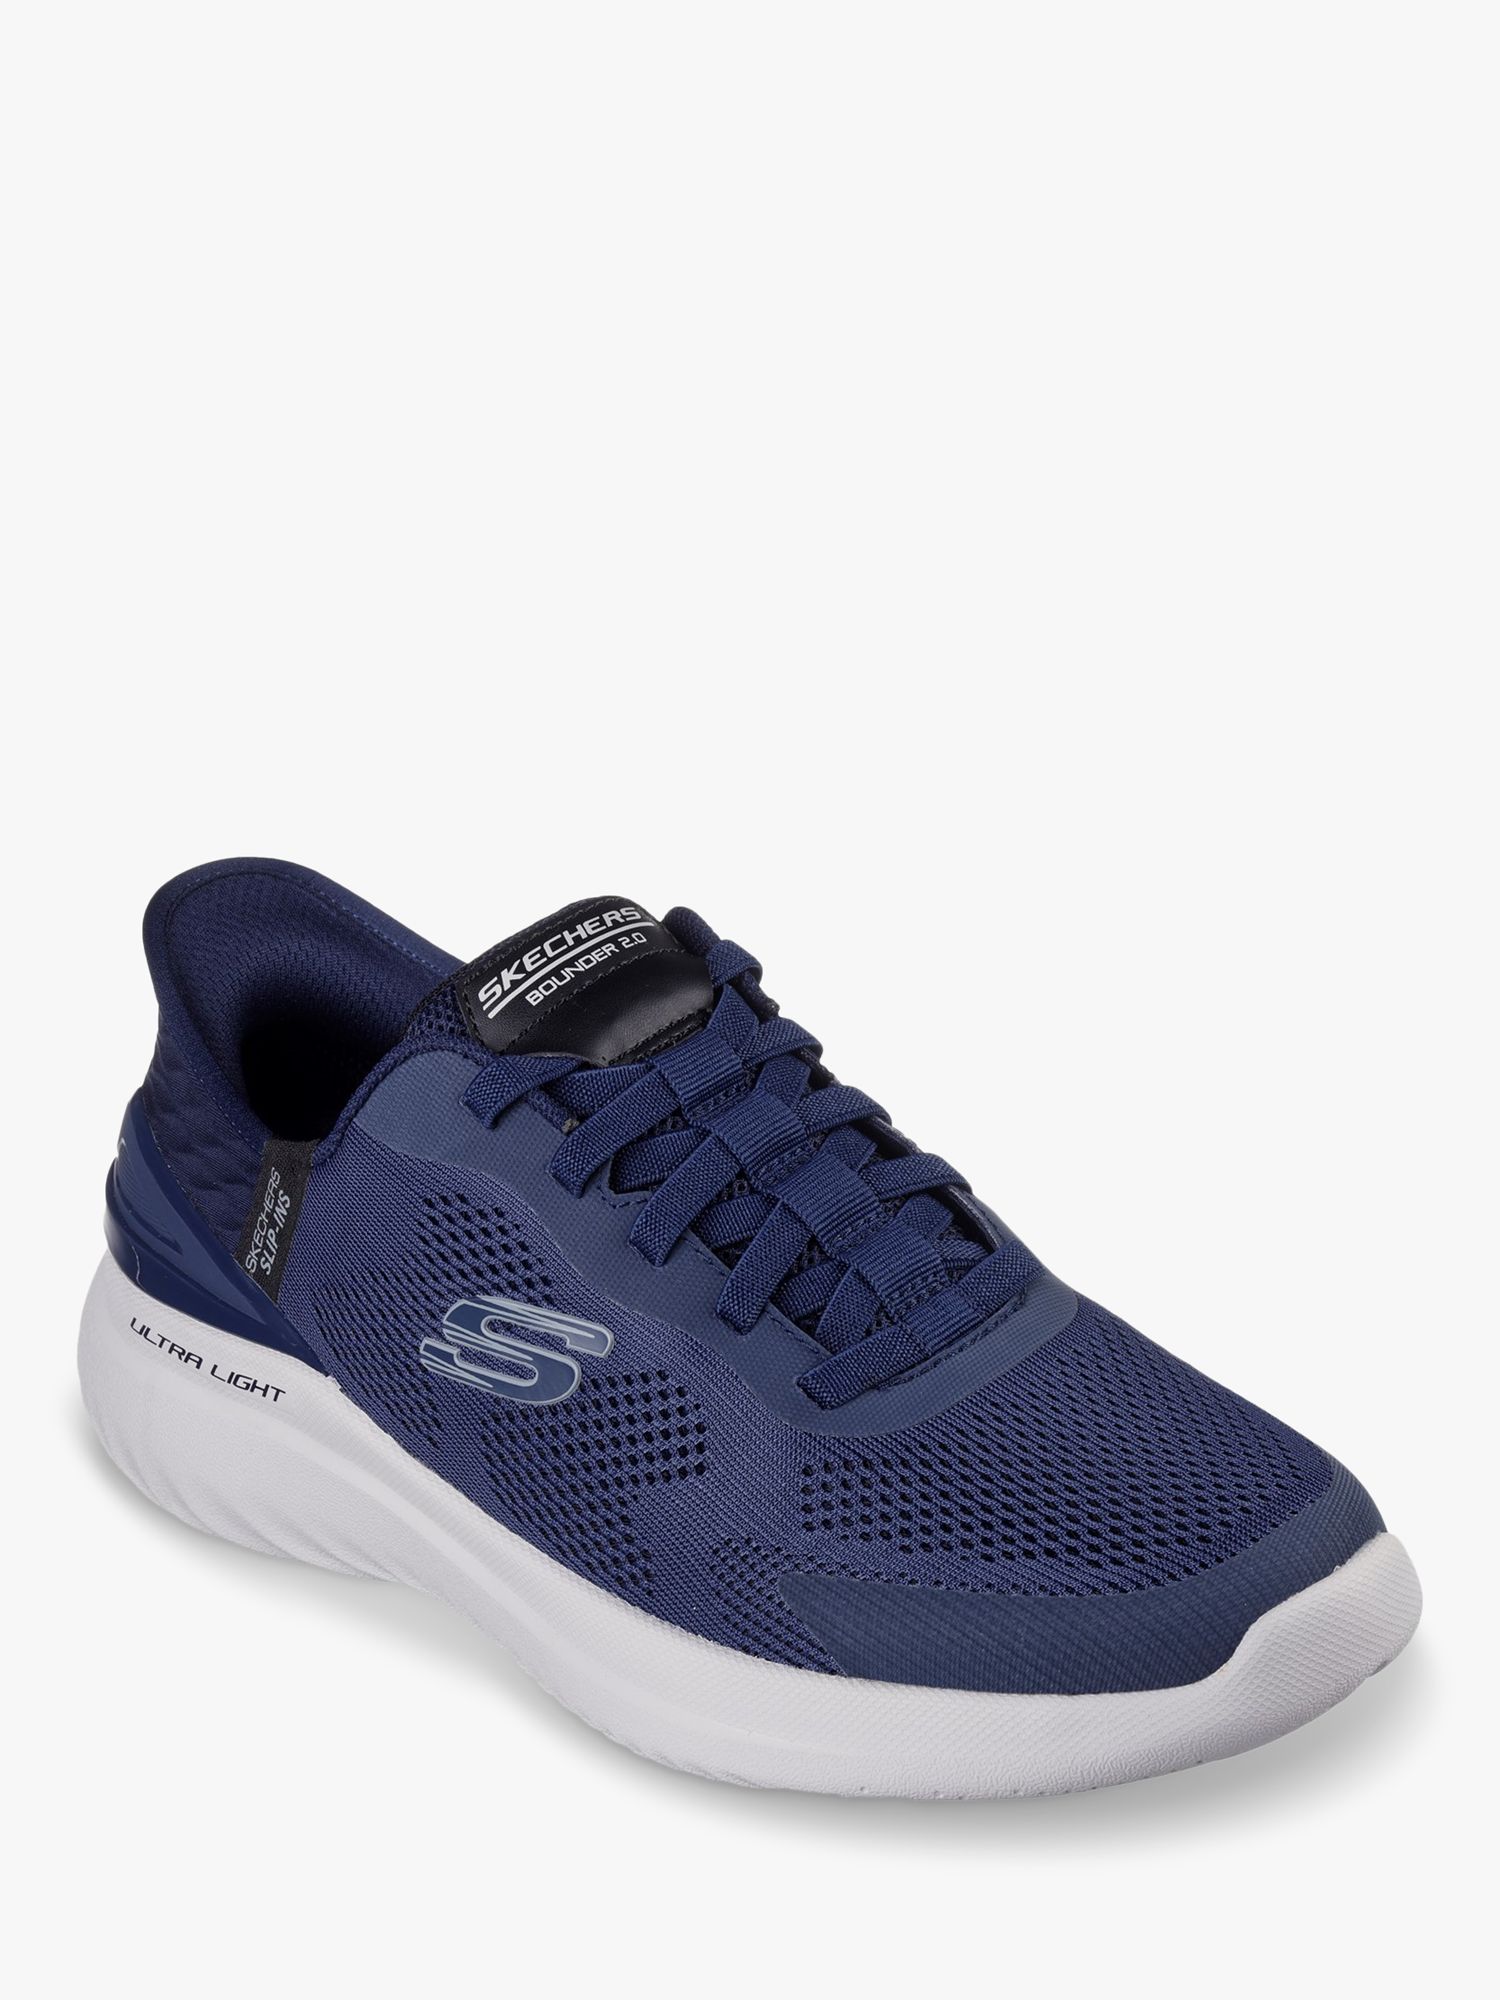 Skechers Bounder 2.0 Emerged Trainers, Navy, 6